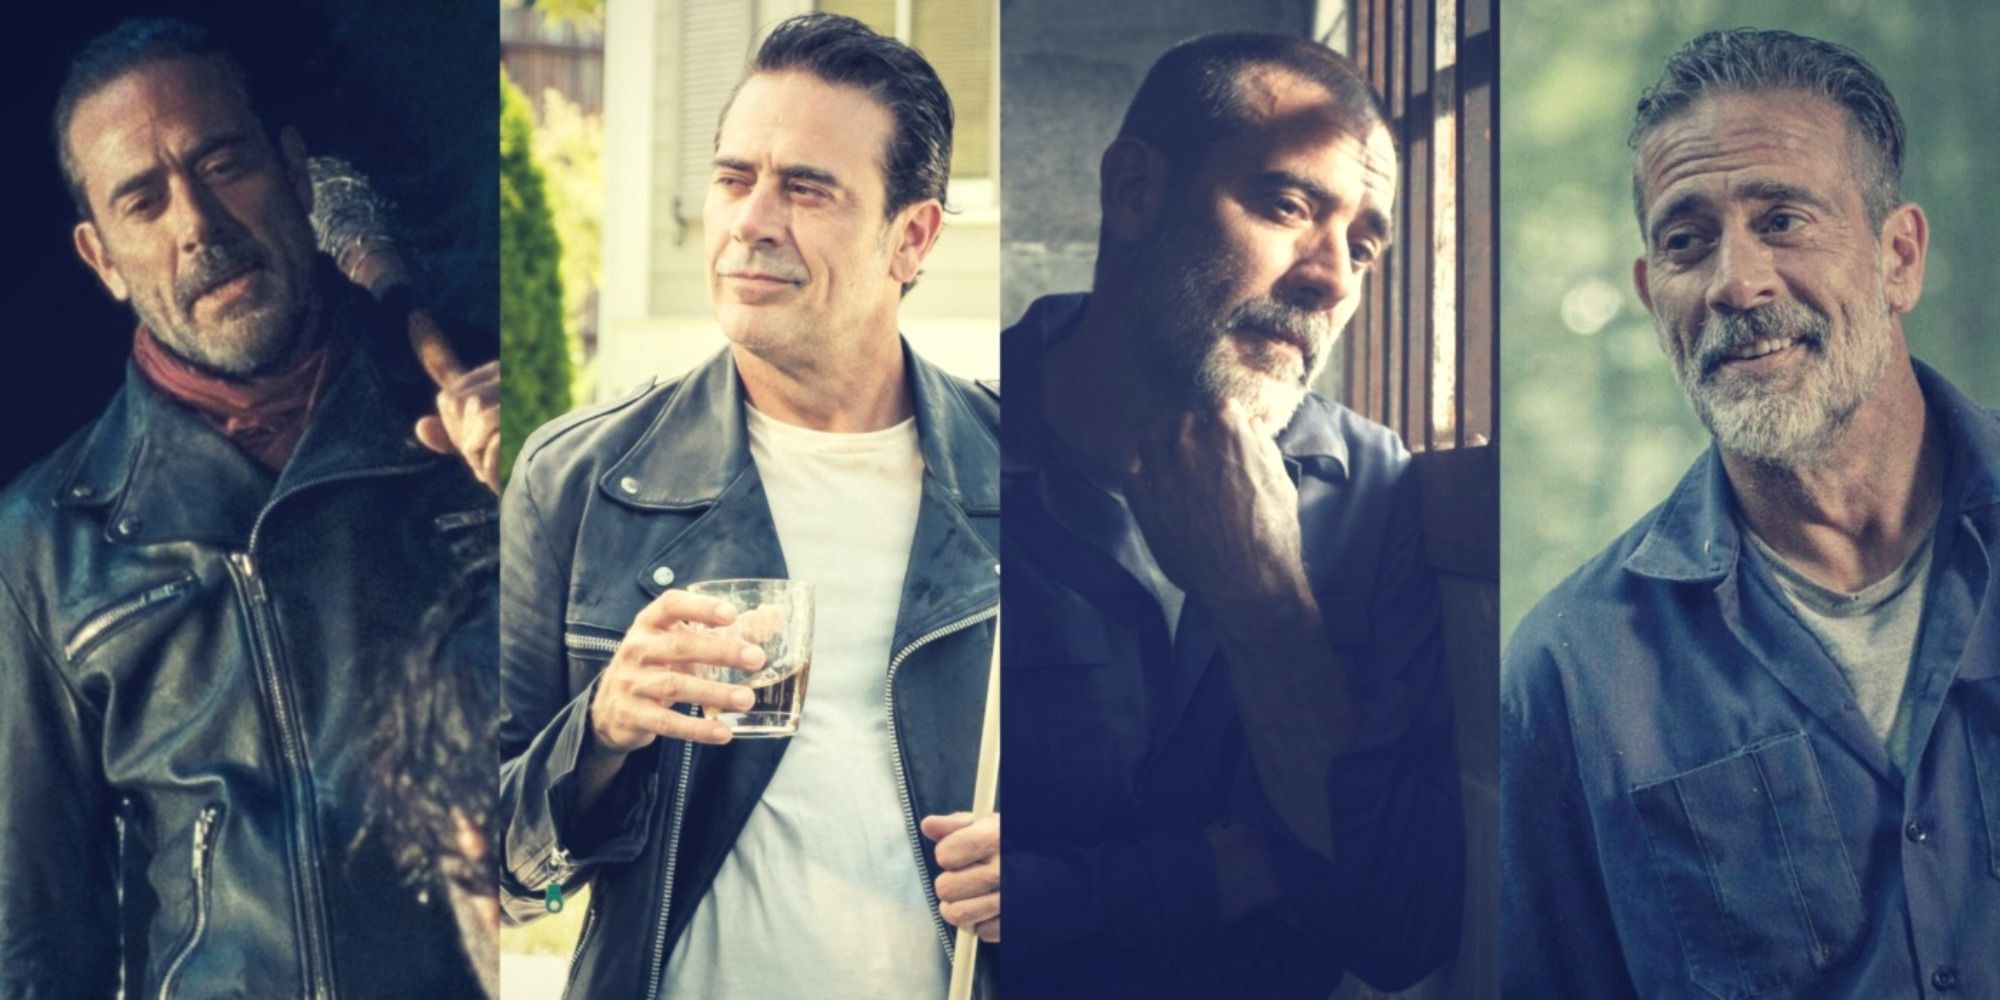 The Walking Dead Negan’s Transformation Over The Years (In Pictures)